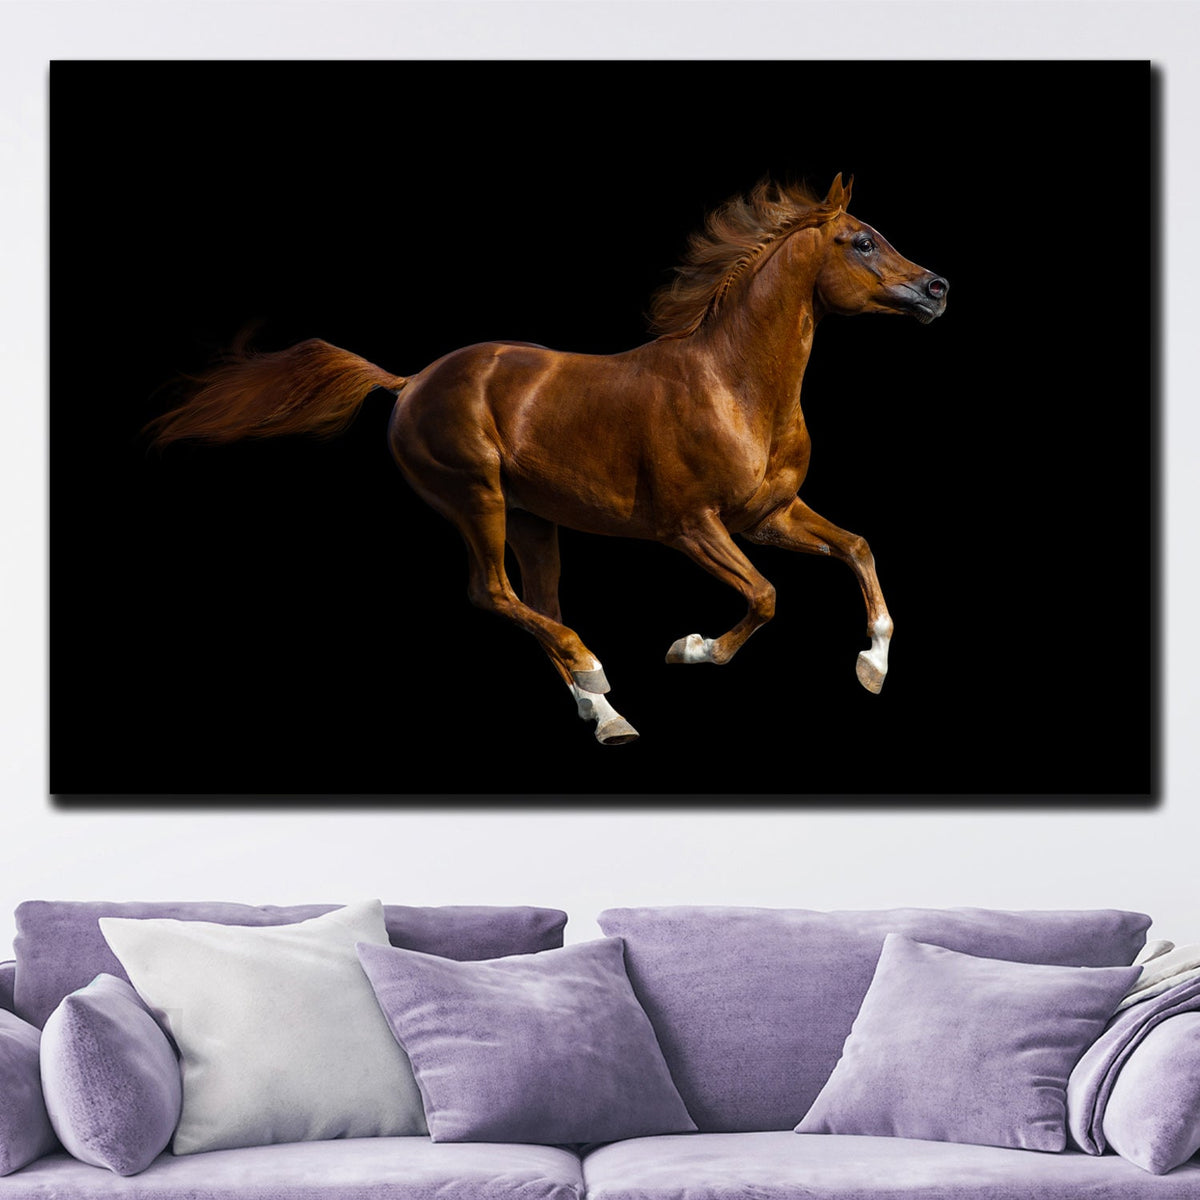 https://cdn.shopify.com/s/files/1/0387/9986/8044/products/ChestnutHorseCanvasArtprintStretched-4.jpg